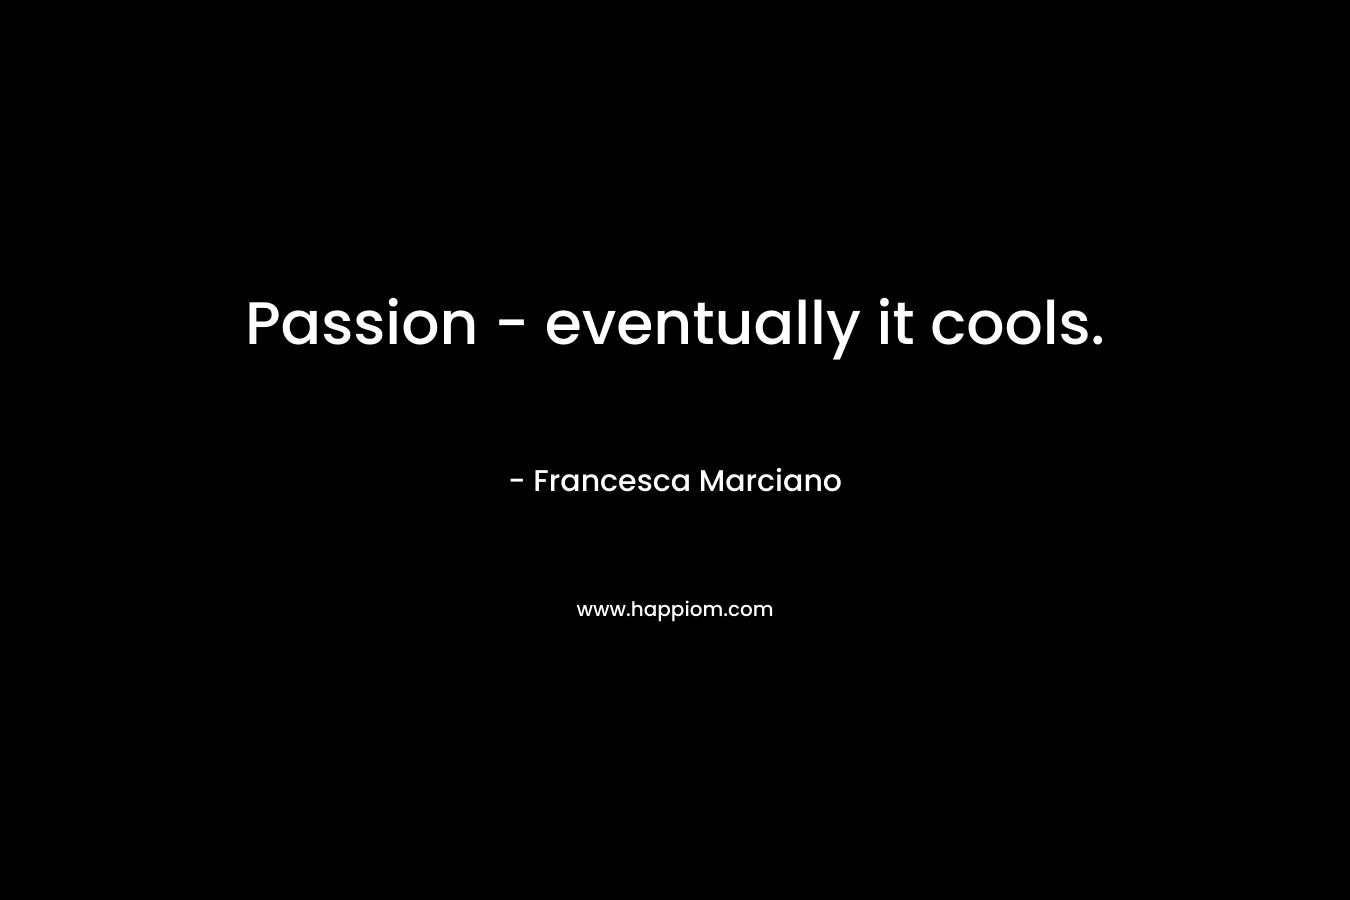 Passion - eventually it cools.